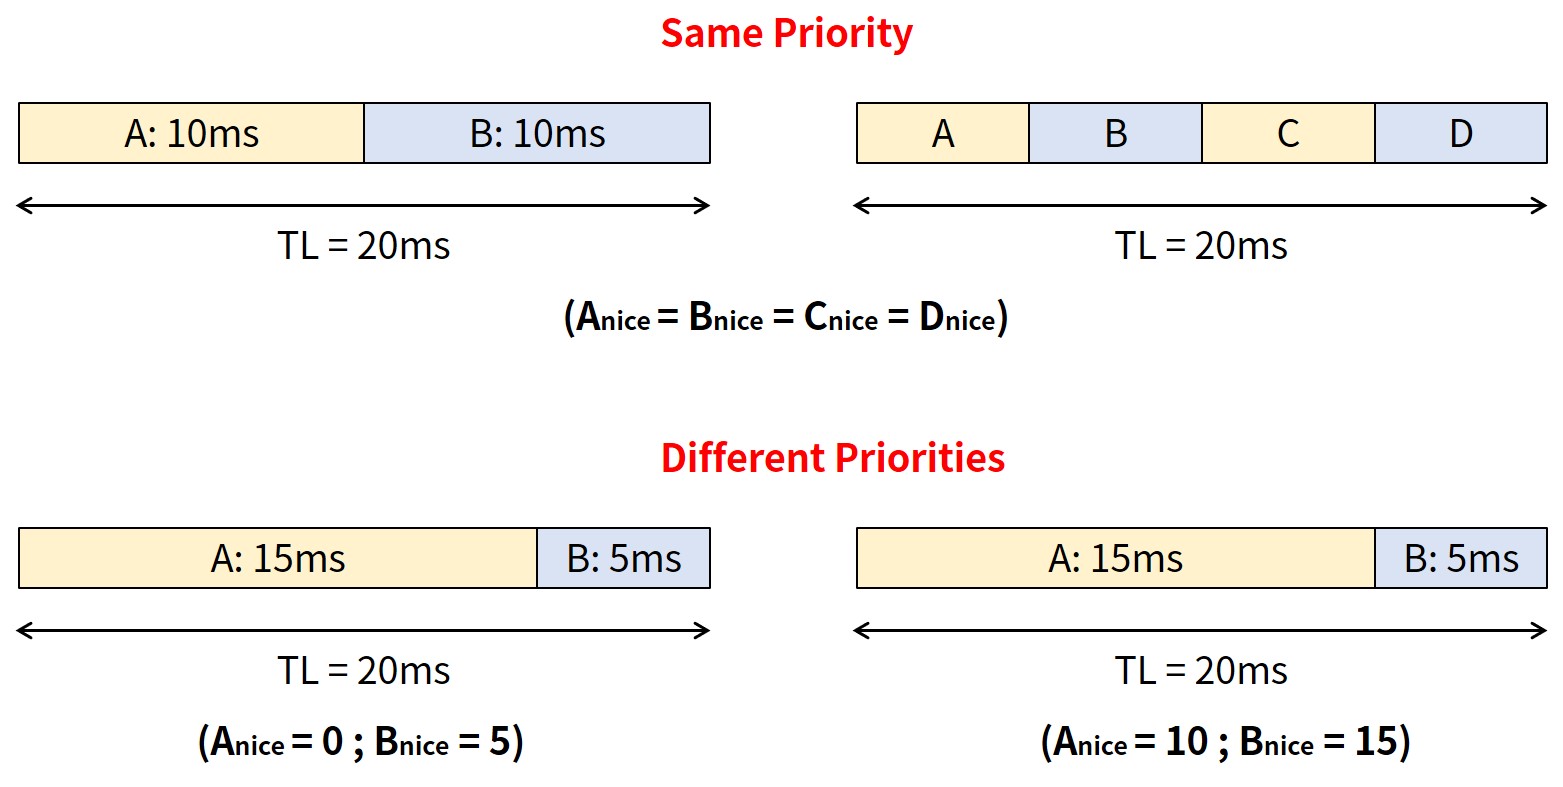 example of linux cfs with same and different priorities